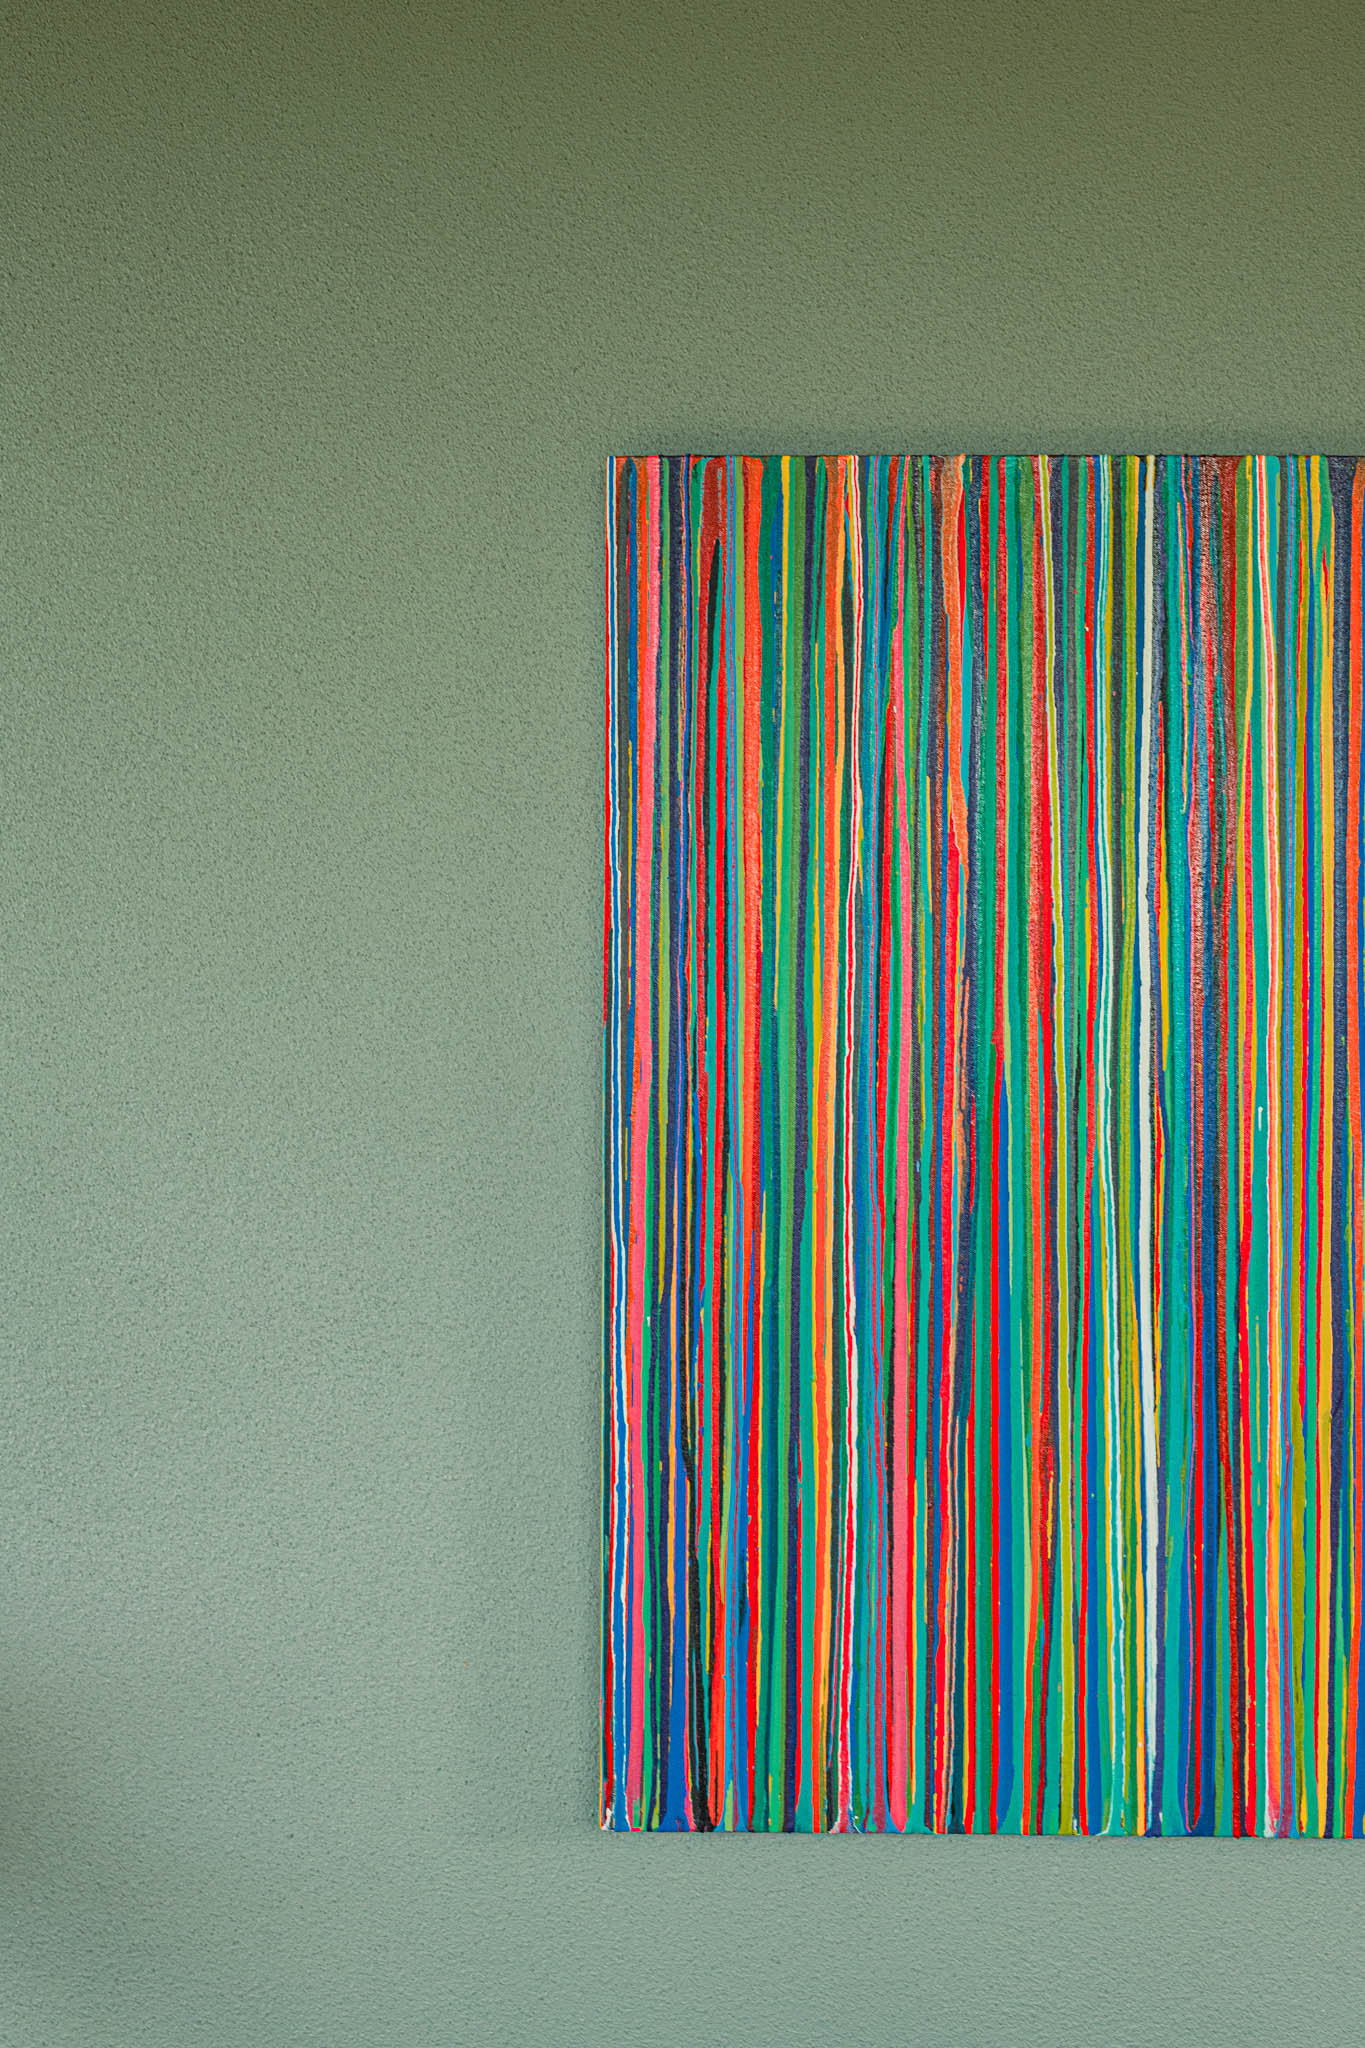 Abstract art hanging on a teal wall.